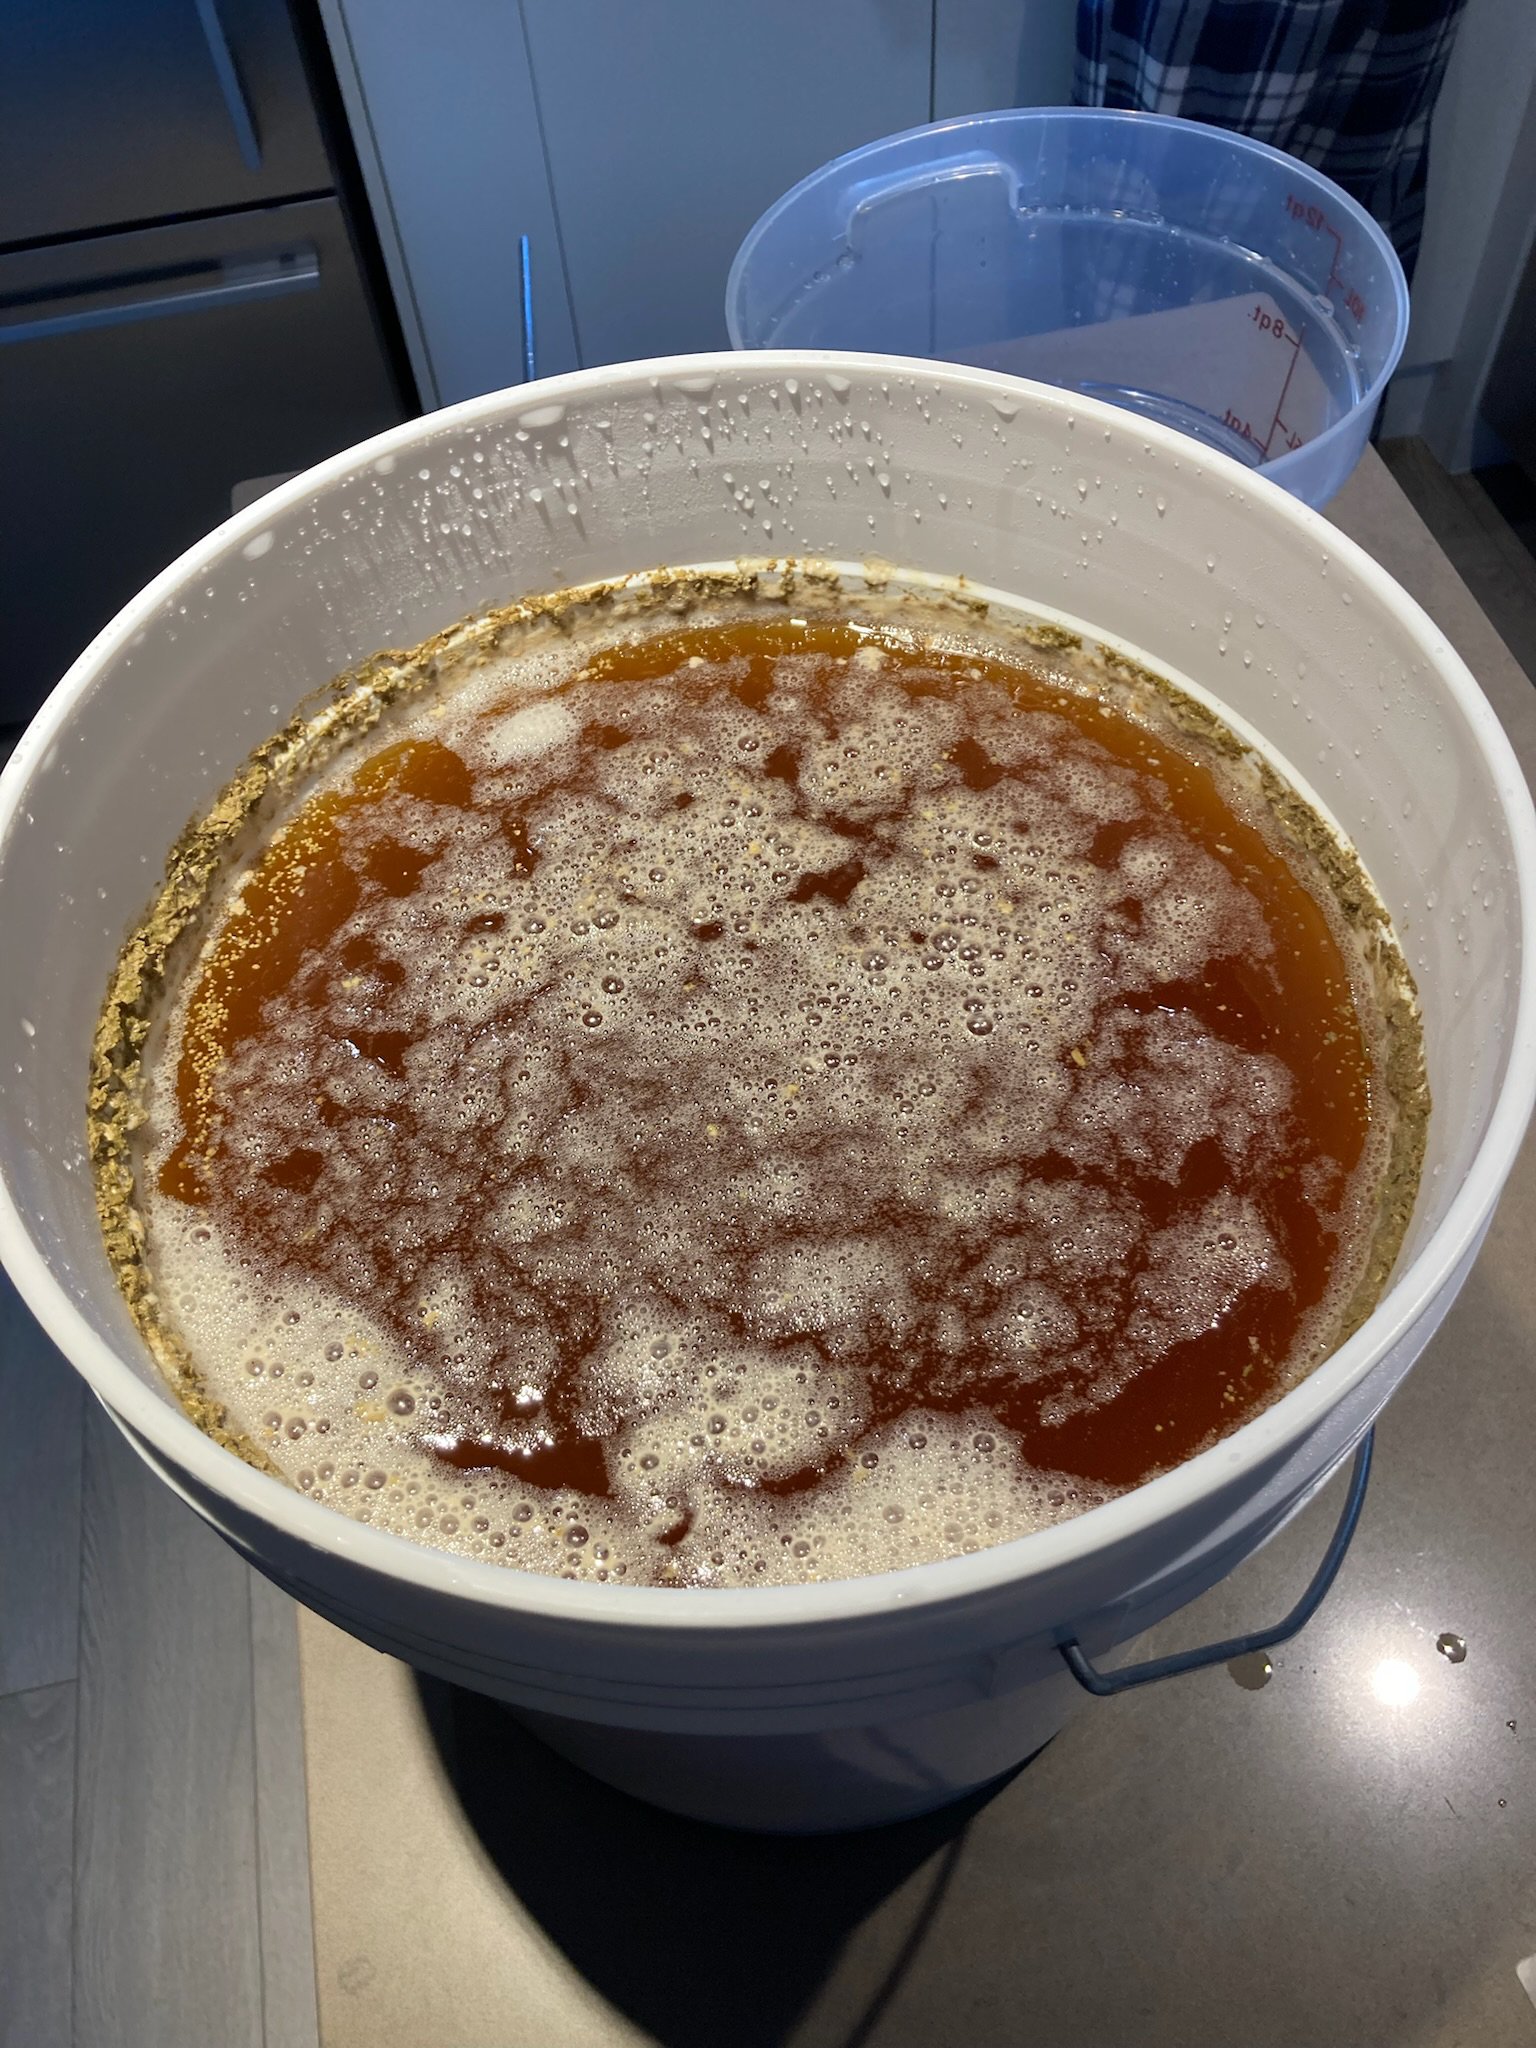  Our beer in the primary fermentation stage.  